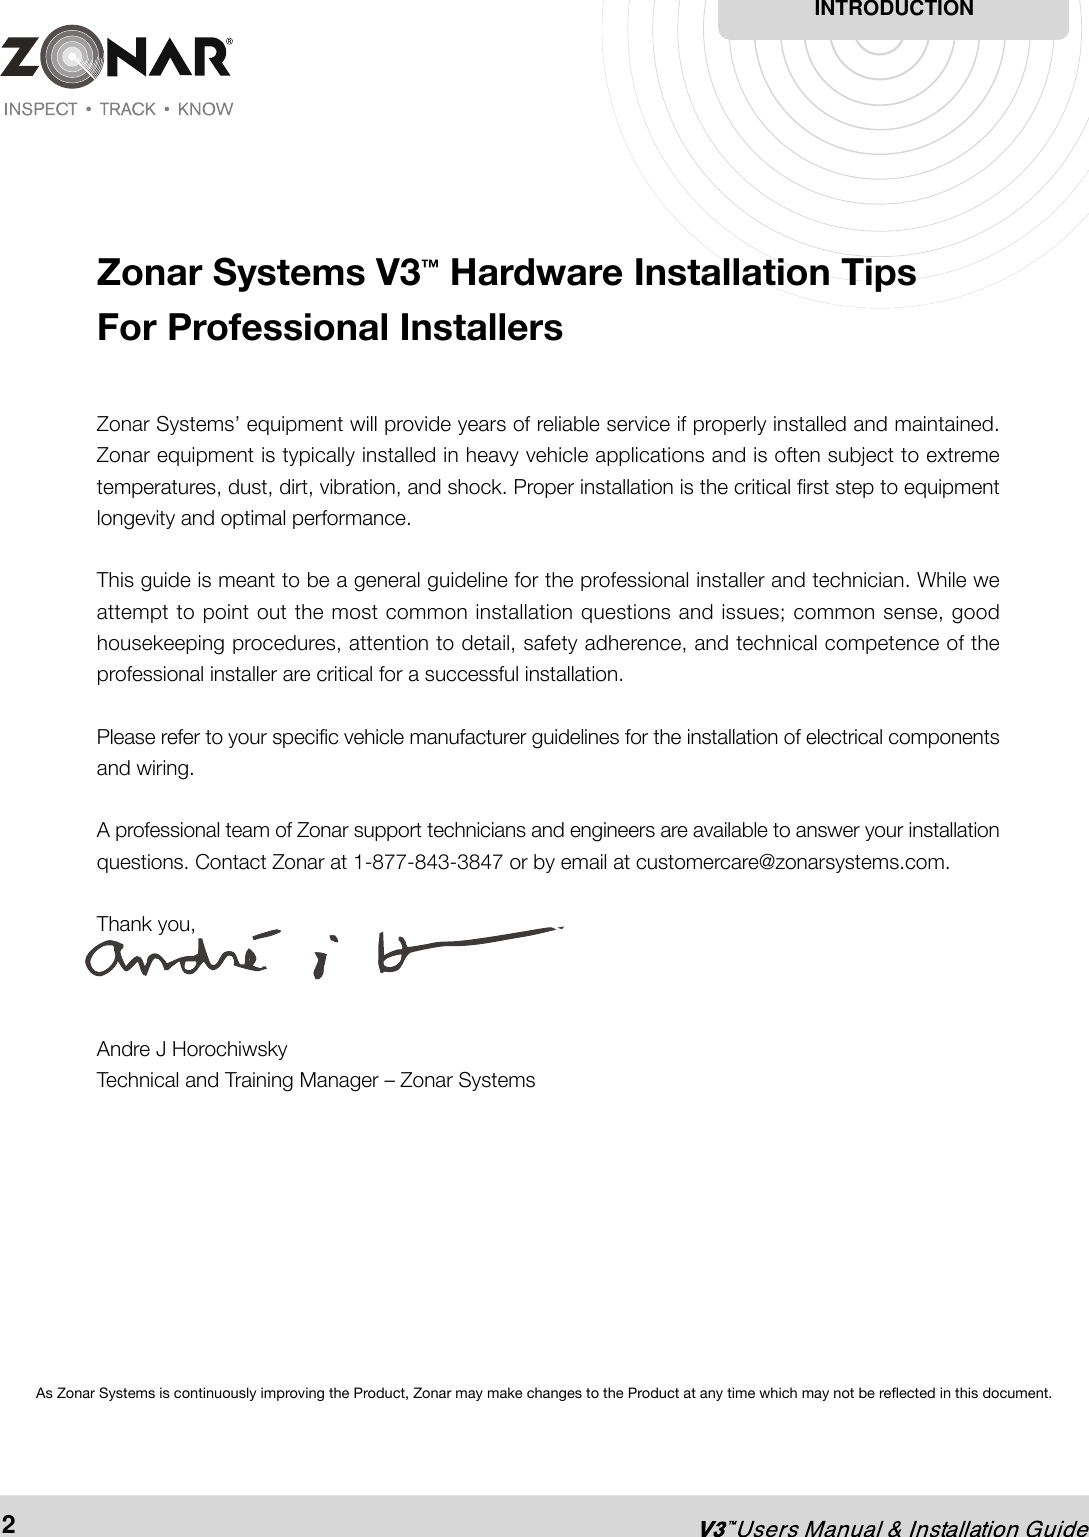 As Zonar Systems is continuously improving the Product, Zonar may make changes to the Product at any time which may not be reflected in this document.INTRODUCTION2Zonar Systems V3™ Hardware Installation TipsFor Professional InstallersZonar Systems’ equipment will provide years of reliable service if properly installed and maintained.Zonar equipment is typically installed in heavy vehicle applications and is often subject to extremetemperatures, dust, dirt, vibration, and shock. Proper installation is the critical first step to equipmentlongevity and optimal performance.This guide is meant to be a general guideline for the professional installer and technician. While weattempt to point out the most common installation questions and issues; common sense, goodhousekeeping procedures, attention to detail, safety adherence, and technical competence of theprofessional installer are critical for a successful installation.Please refer to your specific vehicle manufacturer guidelines for the installation of electrical componentsand wiring.A professional team of Zonar support technicians and engineers are available to answer your installationquestions. Contact Zonar at 1-877-843-3847 or by email at customercare@zonarsystems.com.Thank you,Andre J HorochiwskyTechnical and Training Manager – Zonar Systems